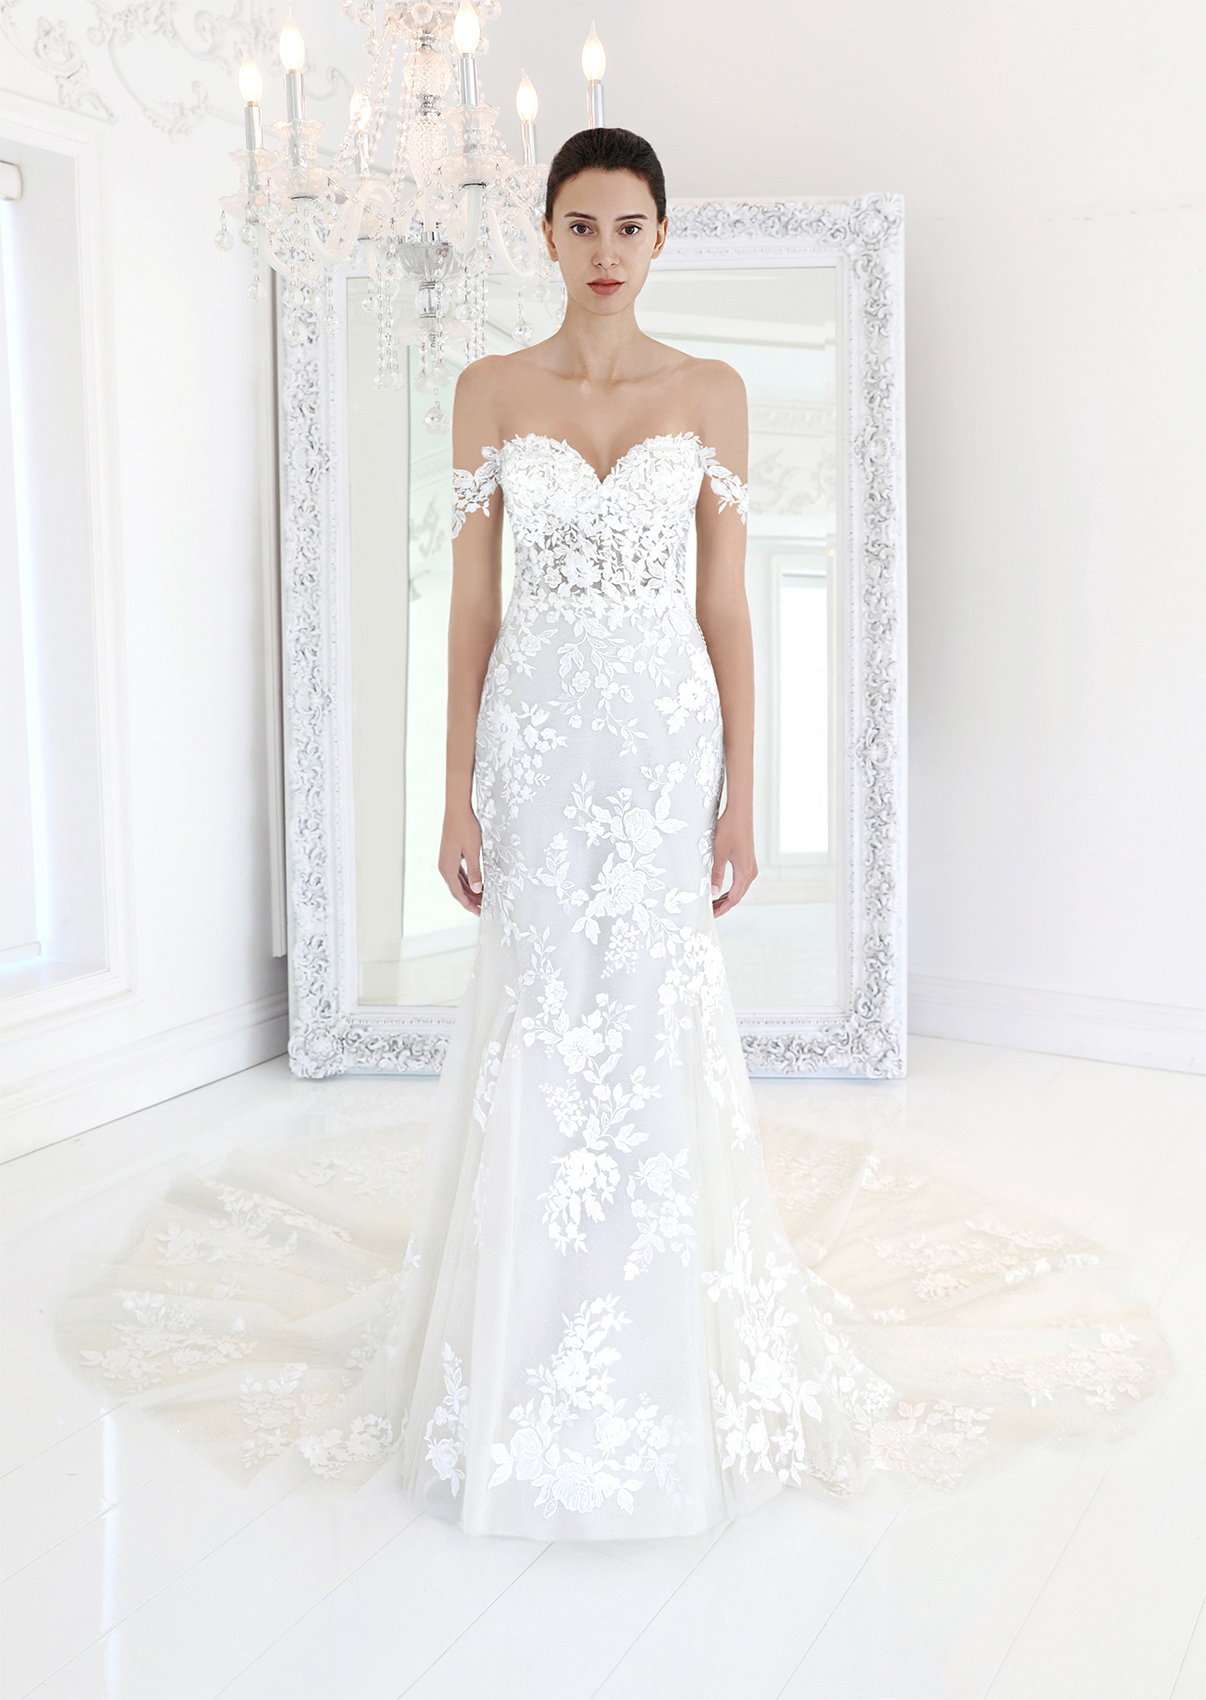 A Guide to Choosing the Perfect White Lace Wedding Dress